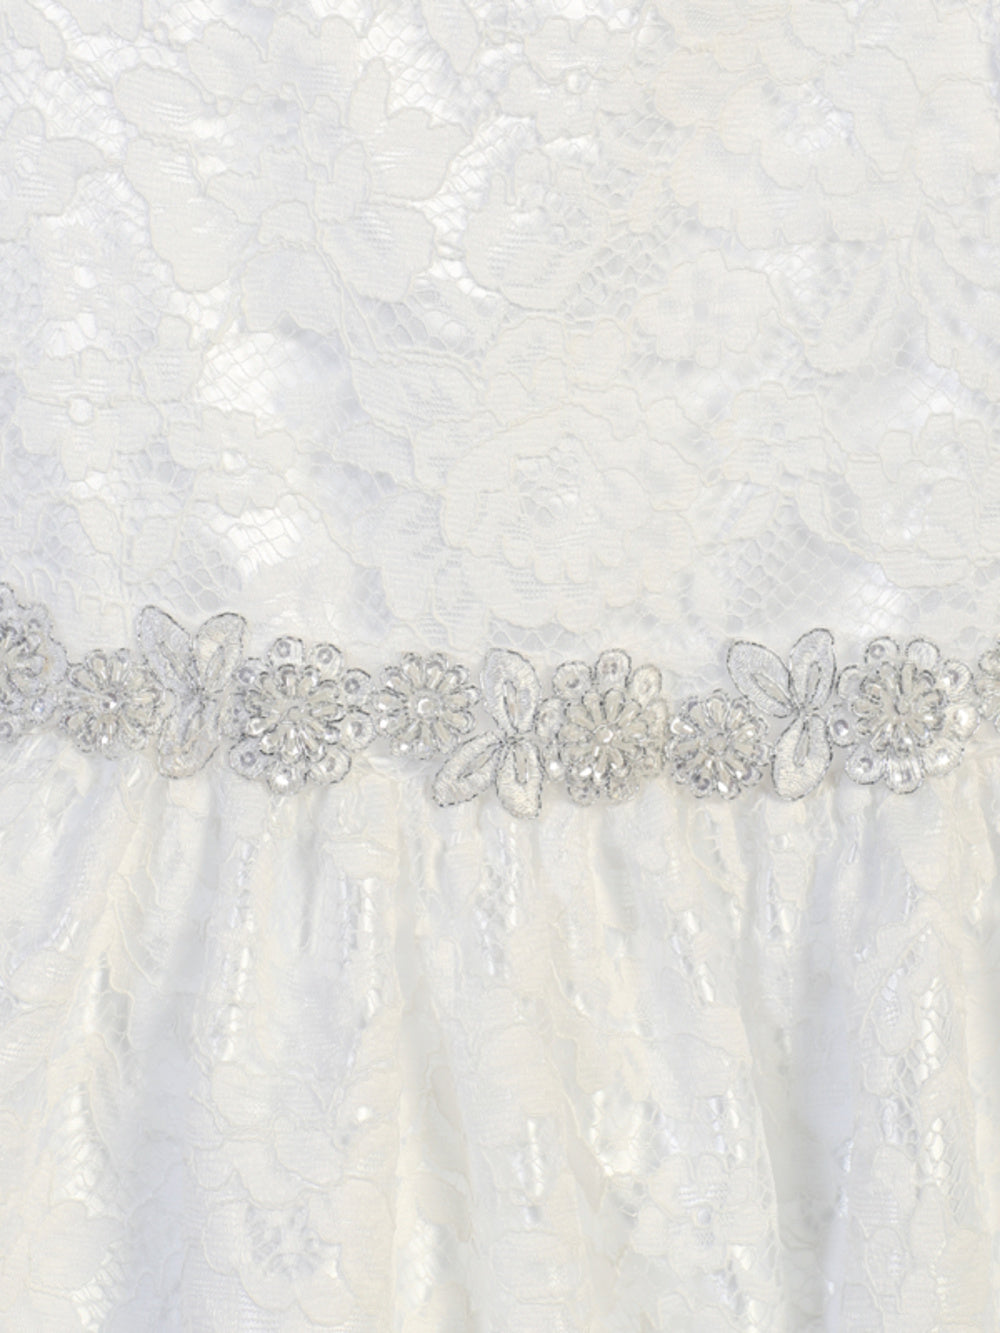 Lace with Silver corded floral trim size 6 SP156a